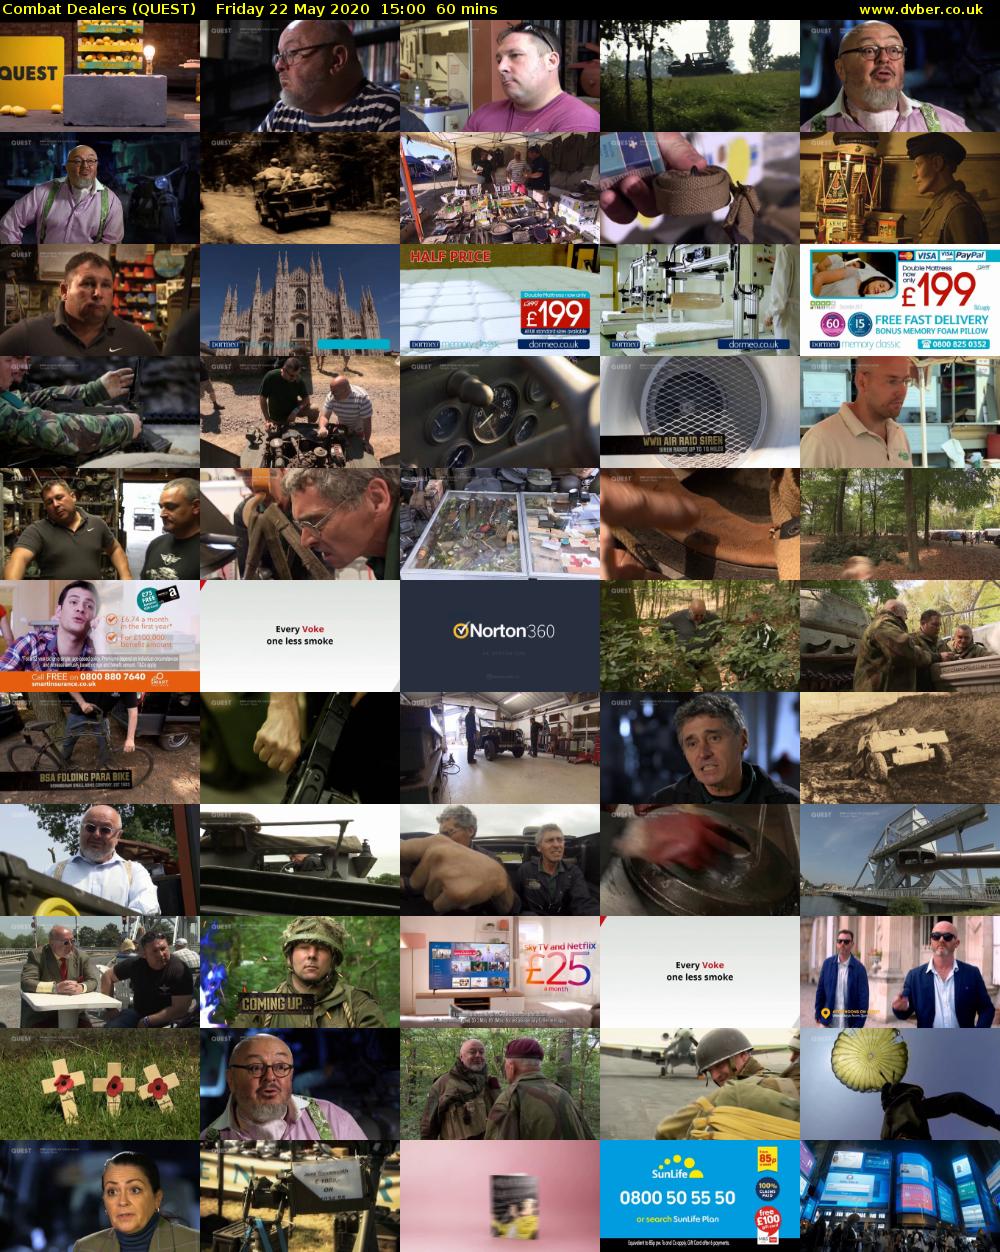 Combat Dealers (QUEST) Friday 22 May 2020 15:00 - 16:00